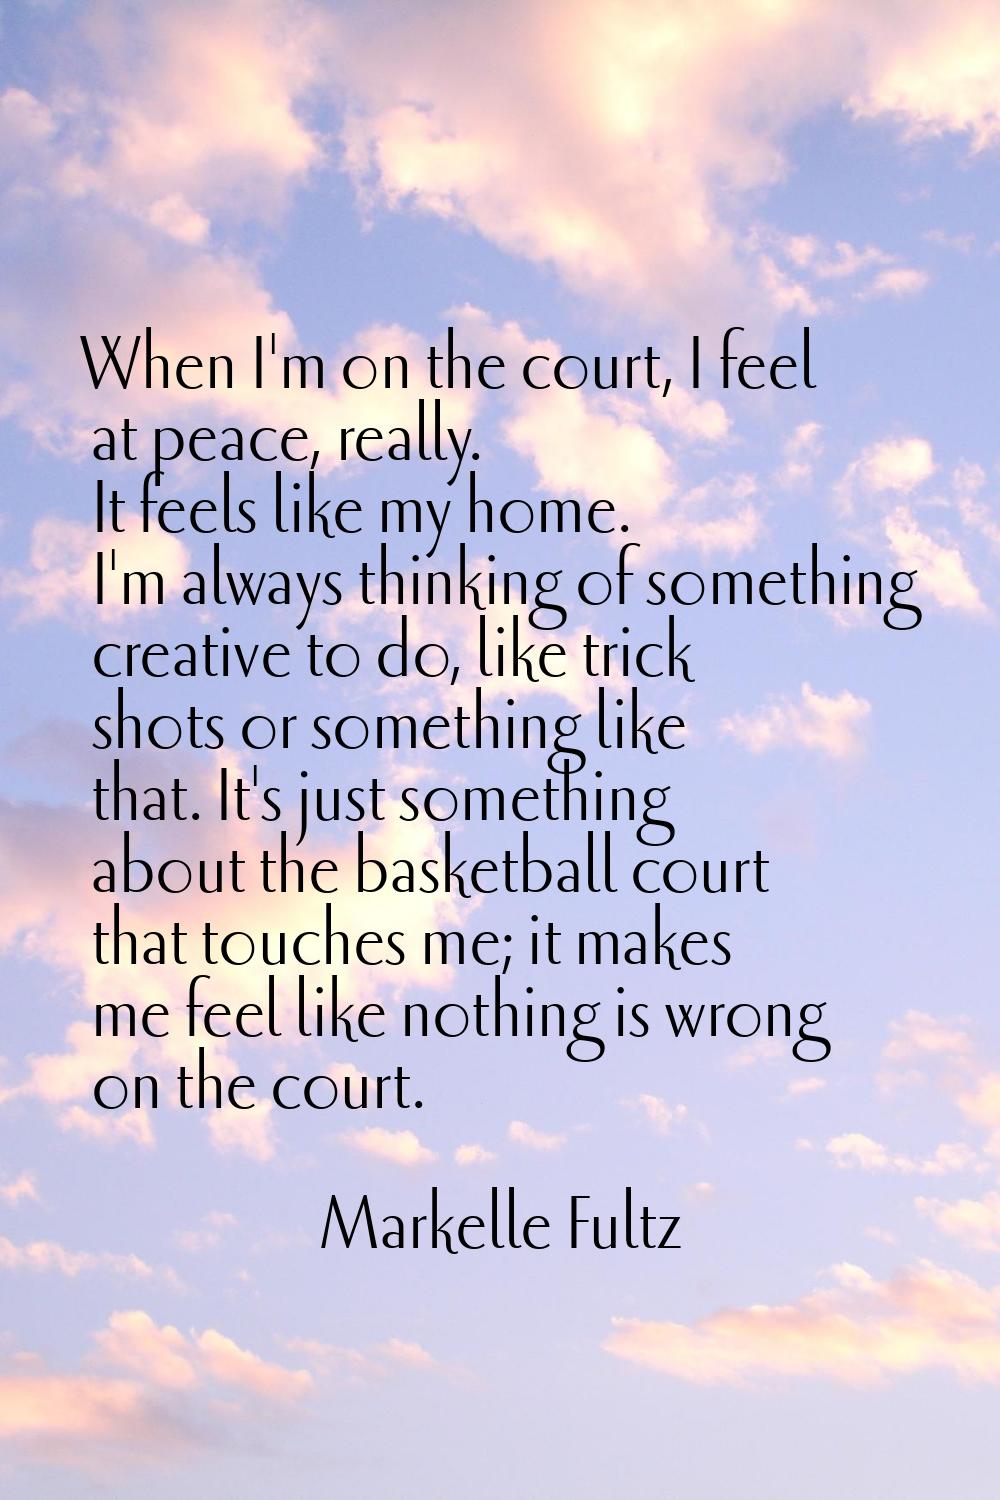 When I'm on the court, I feel at peace, really. It feels like my home. I'm always thinking of somet